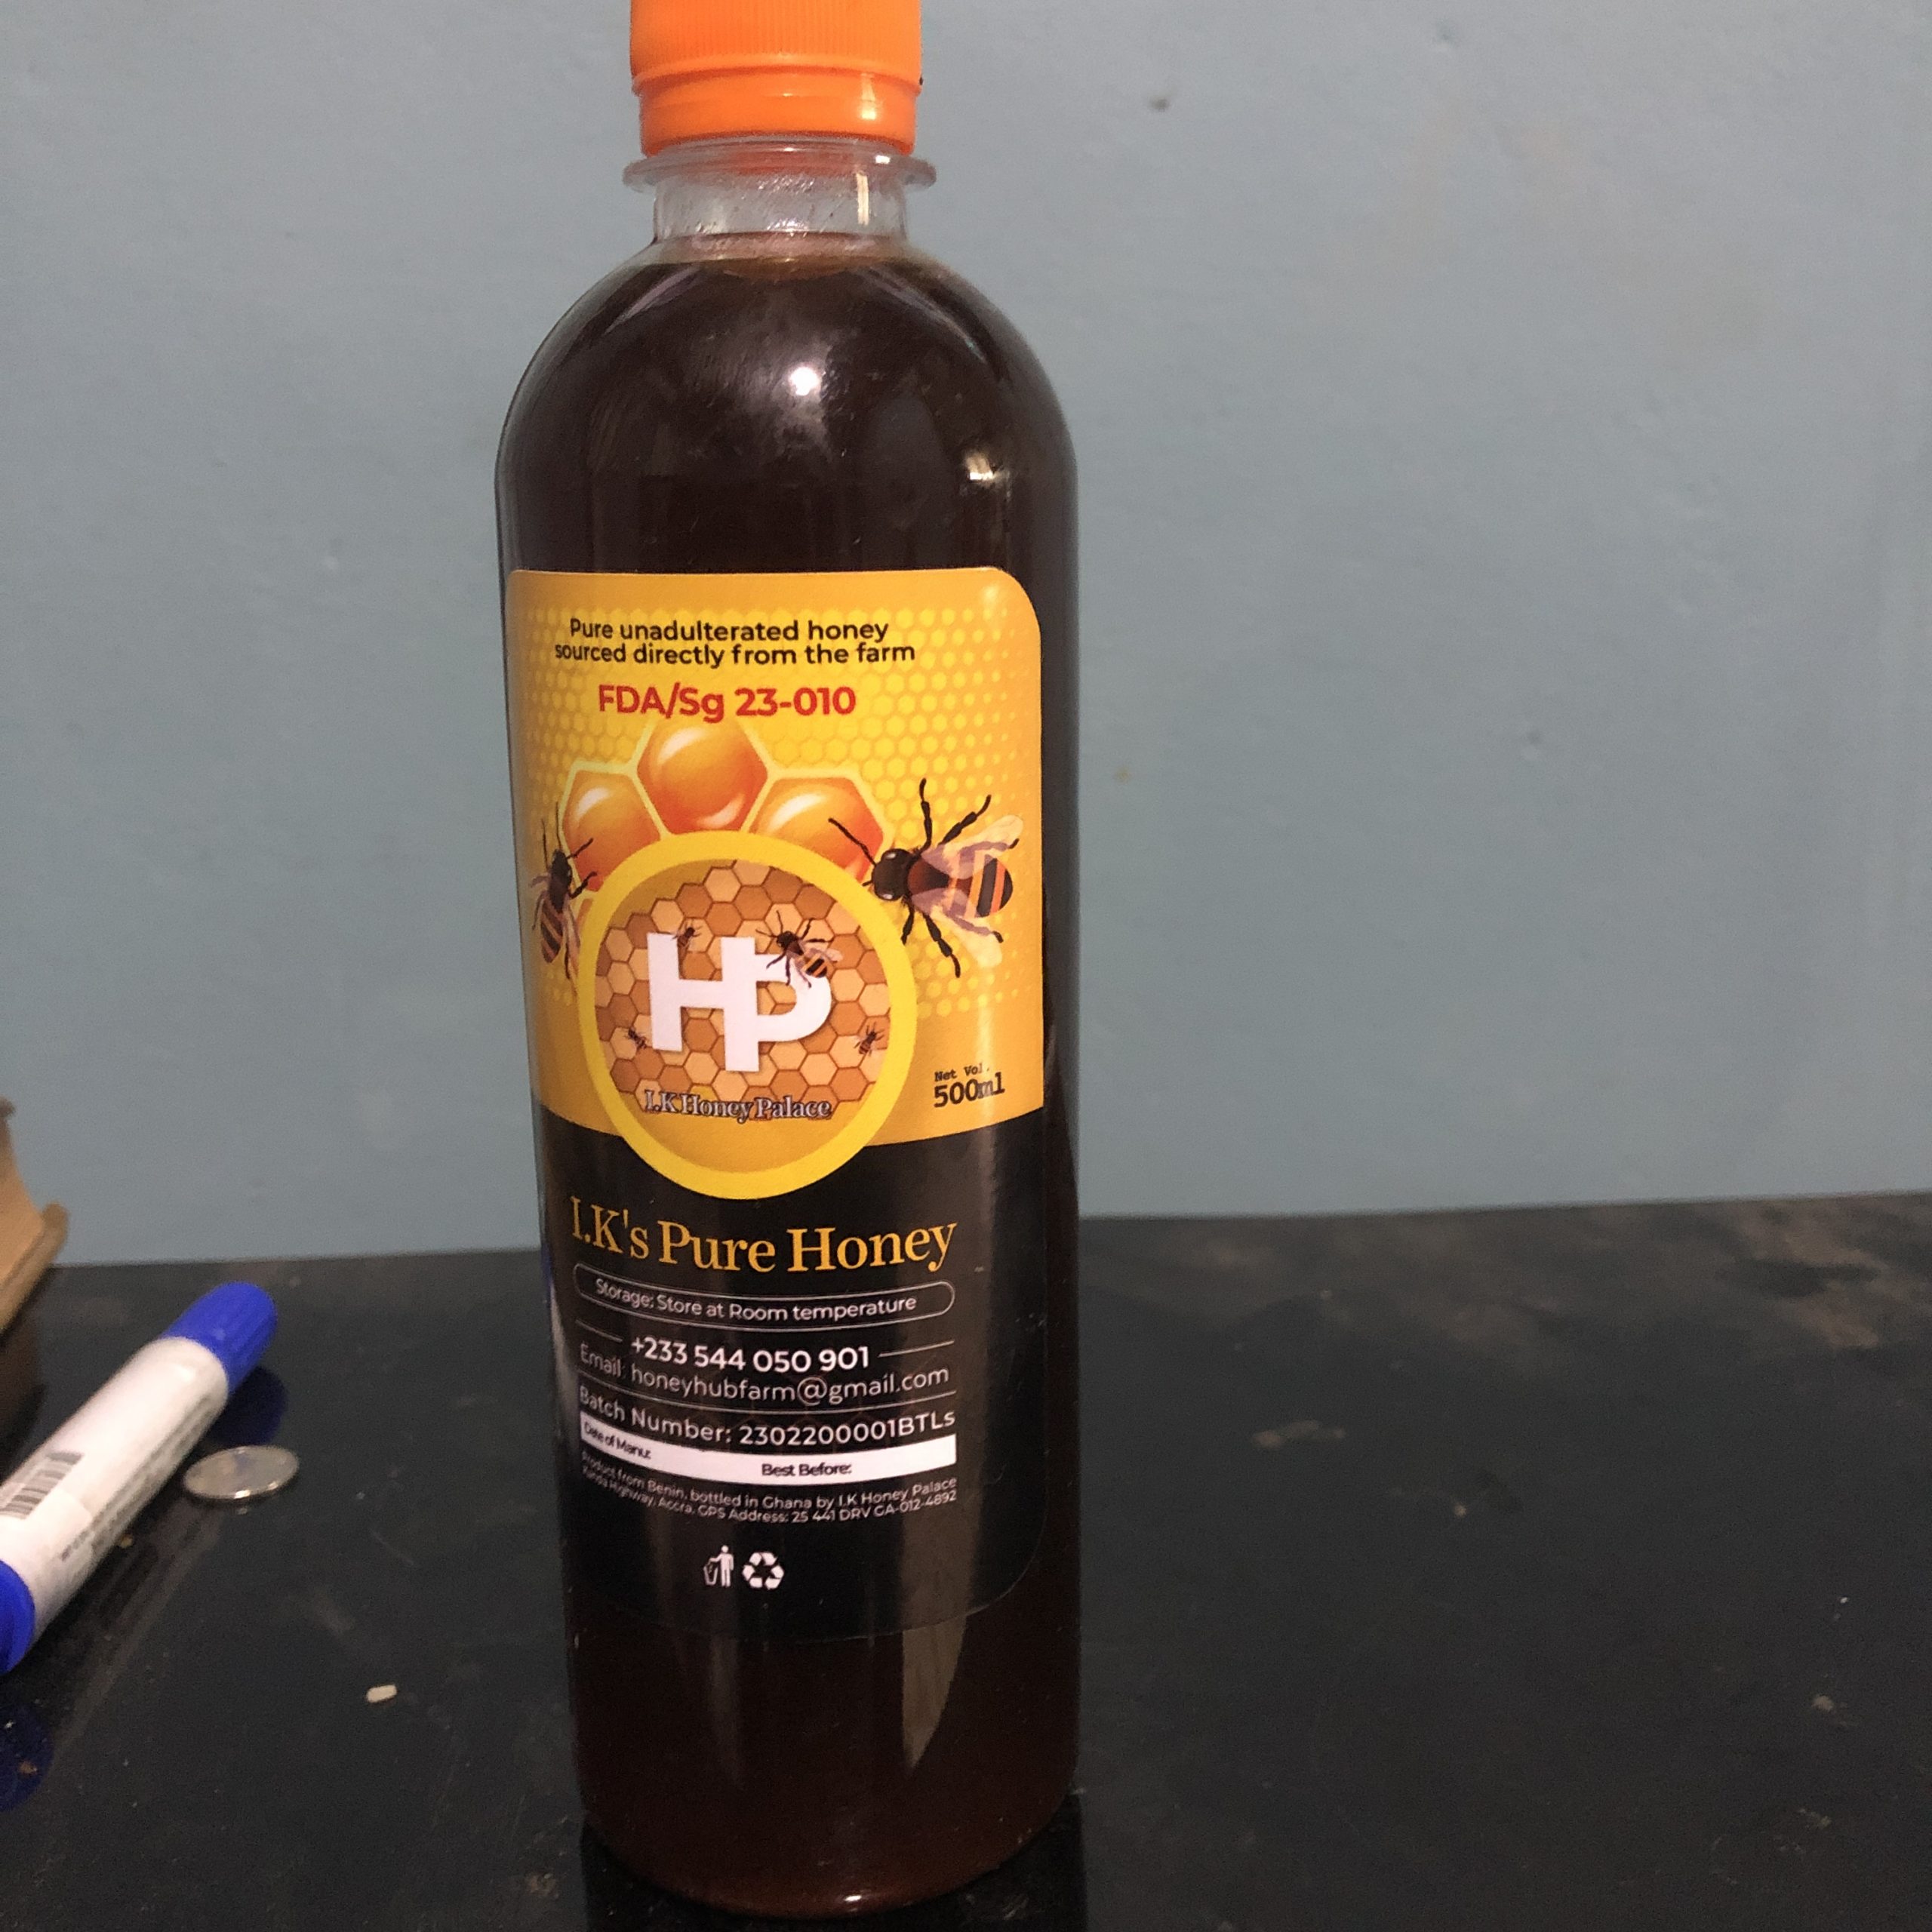 Pure unadulterated honey approved by the FDA.